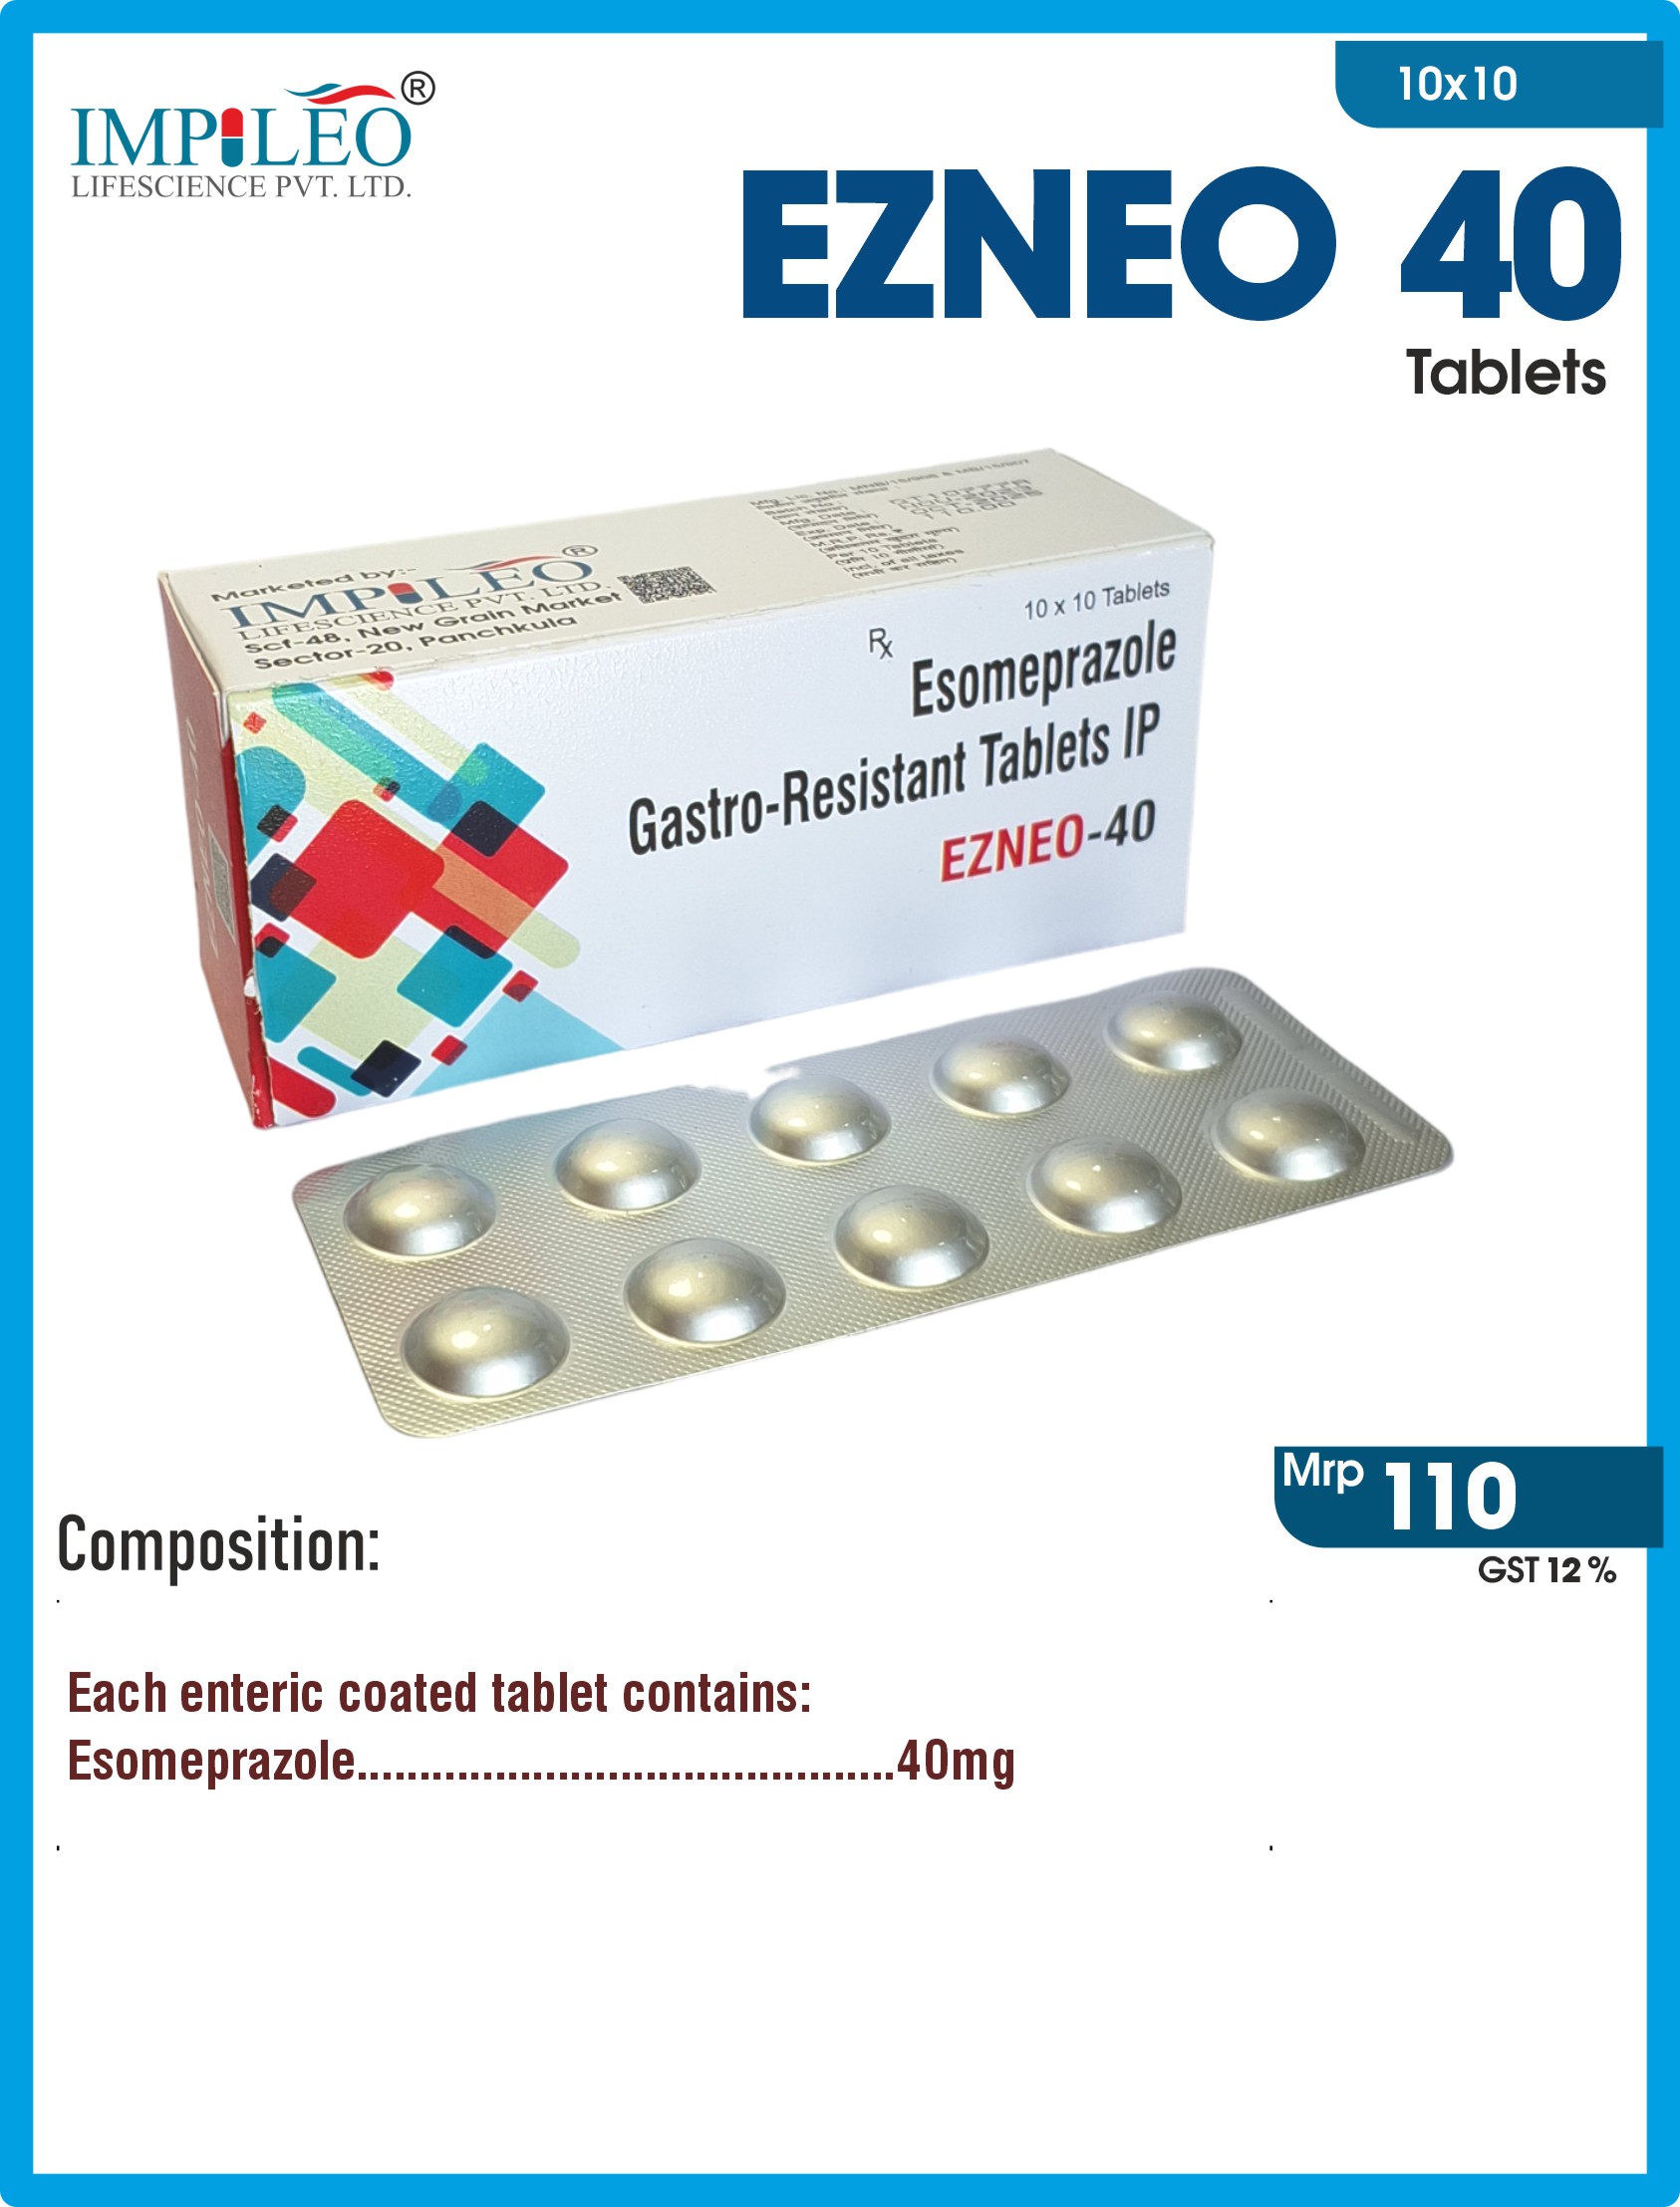 Optimize Digestive Health : Join Forces with Premier PCD Pharma Franchise in India for Esomeprazole EZNEO-40 Tablet